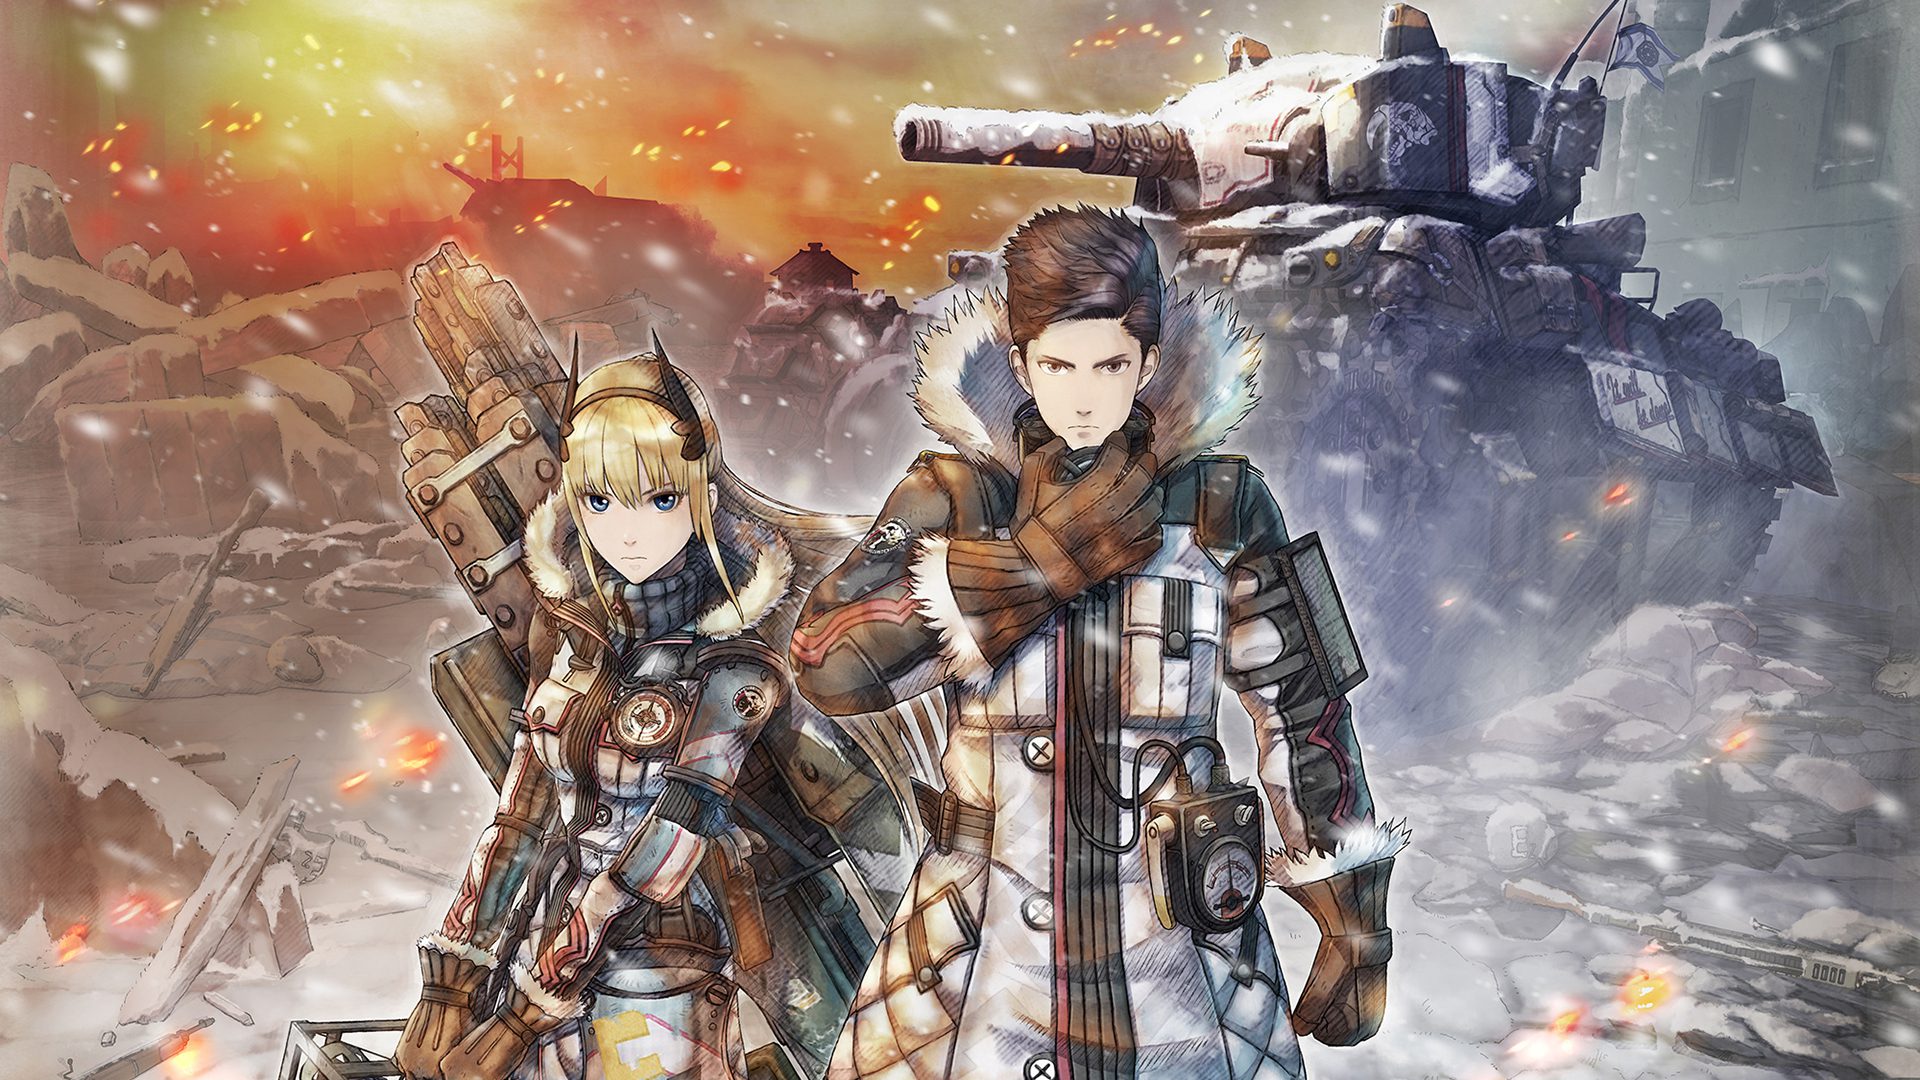 Meet your team in the new squad trailer for Valkyria Chronicles 4